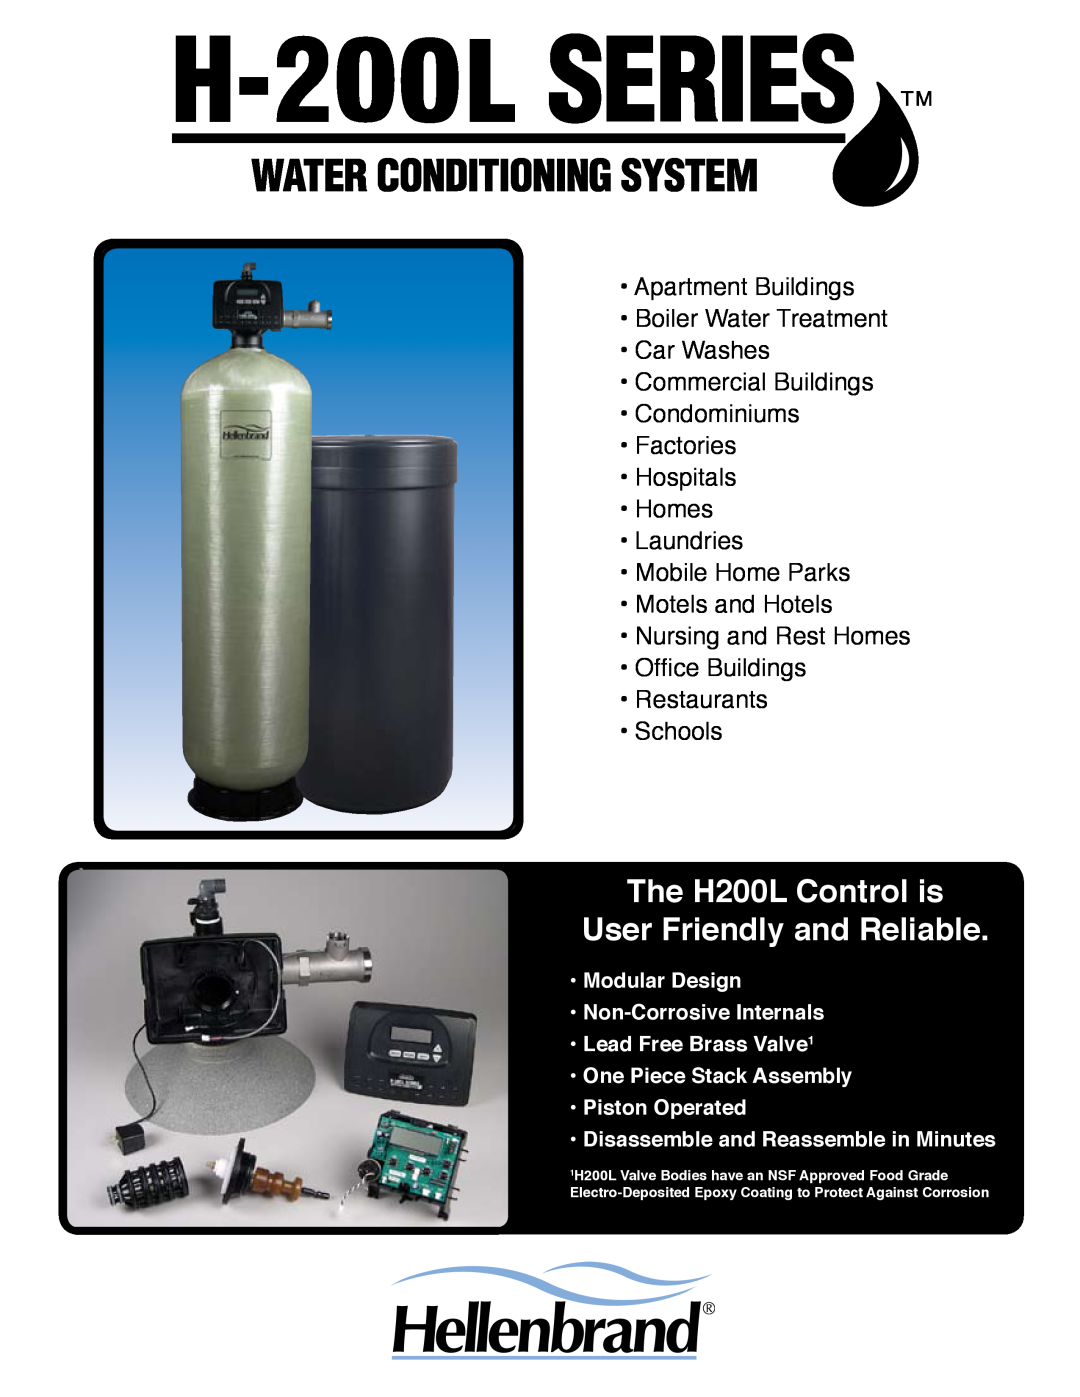 Hellenbrand H-200L Series manual The H200L Control is User Friendly and Reliable 